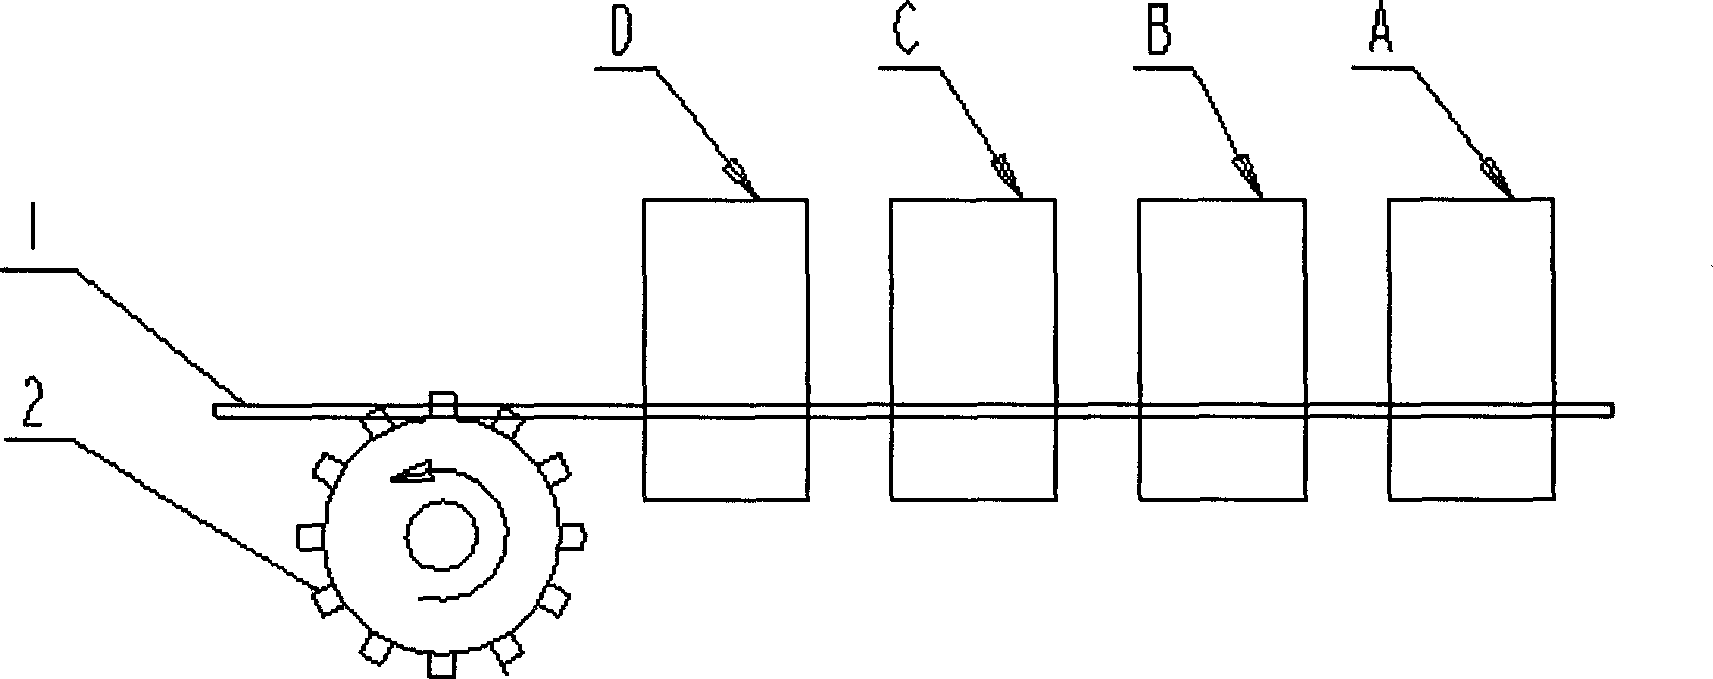 Substrate for blood smear, and apparatus of blood smear